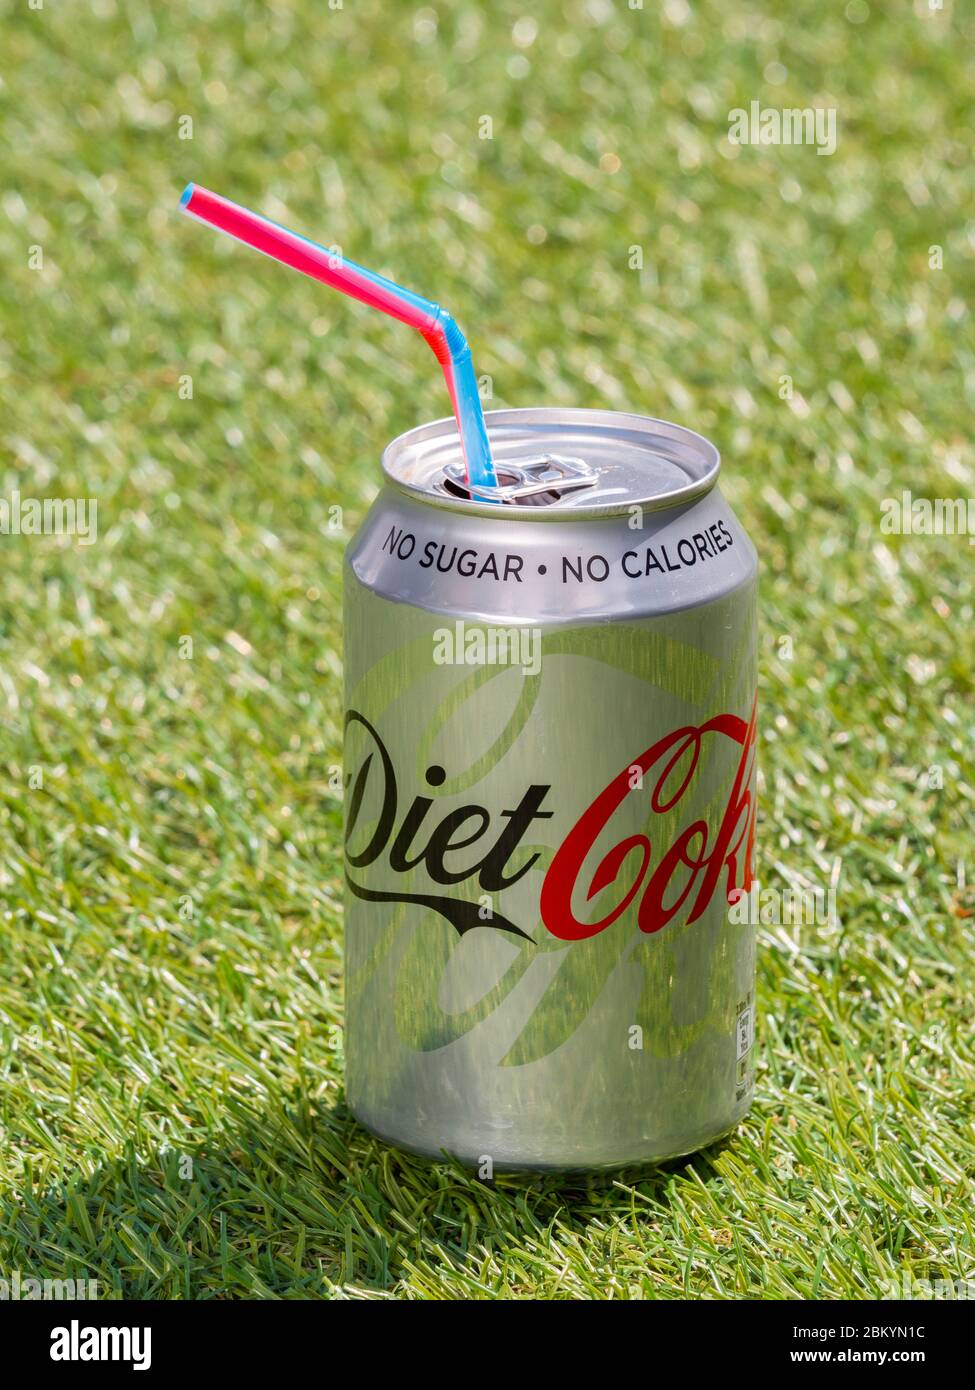 https://c8.alamy.com/comp/2BKYN1C/open-can-of-diet-coke-with-plastic-straw-diet-coke-is-made-by-the-coca-cola-company-and-was-first-introduced-in-1982-2BKYN1C.jpg